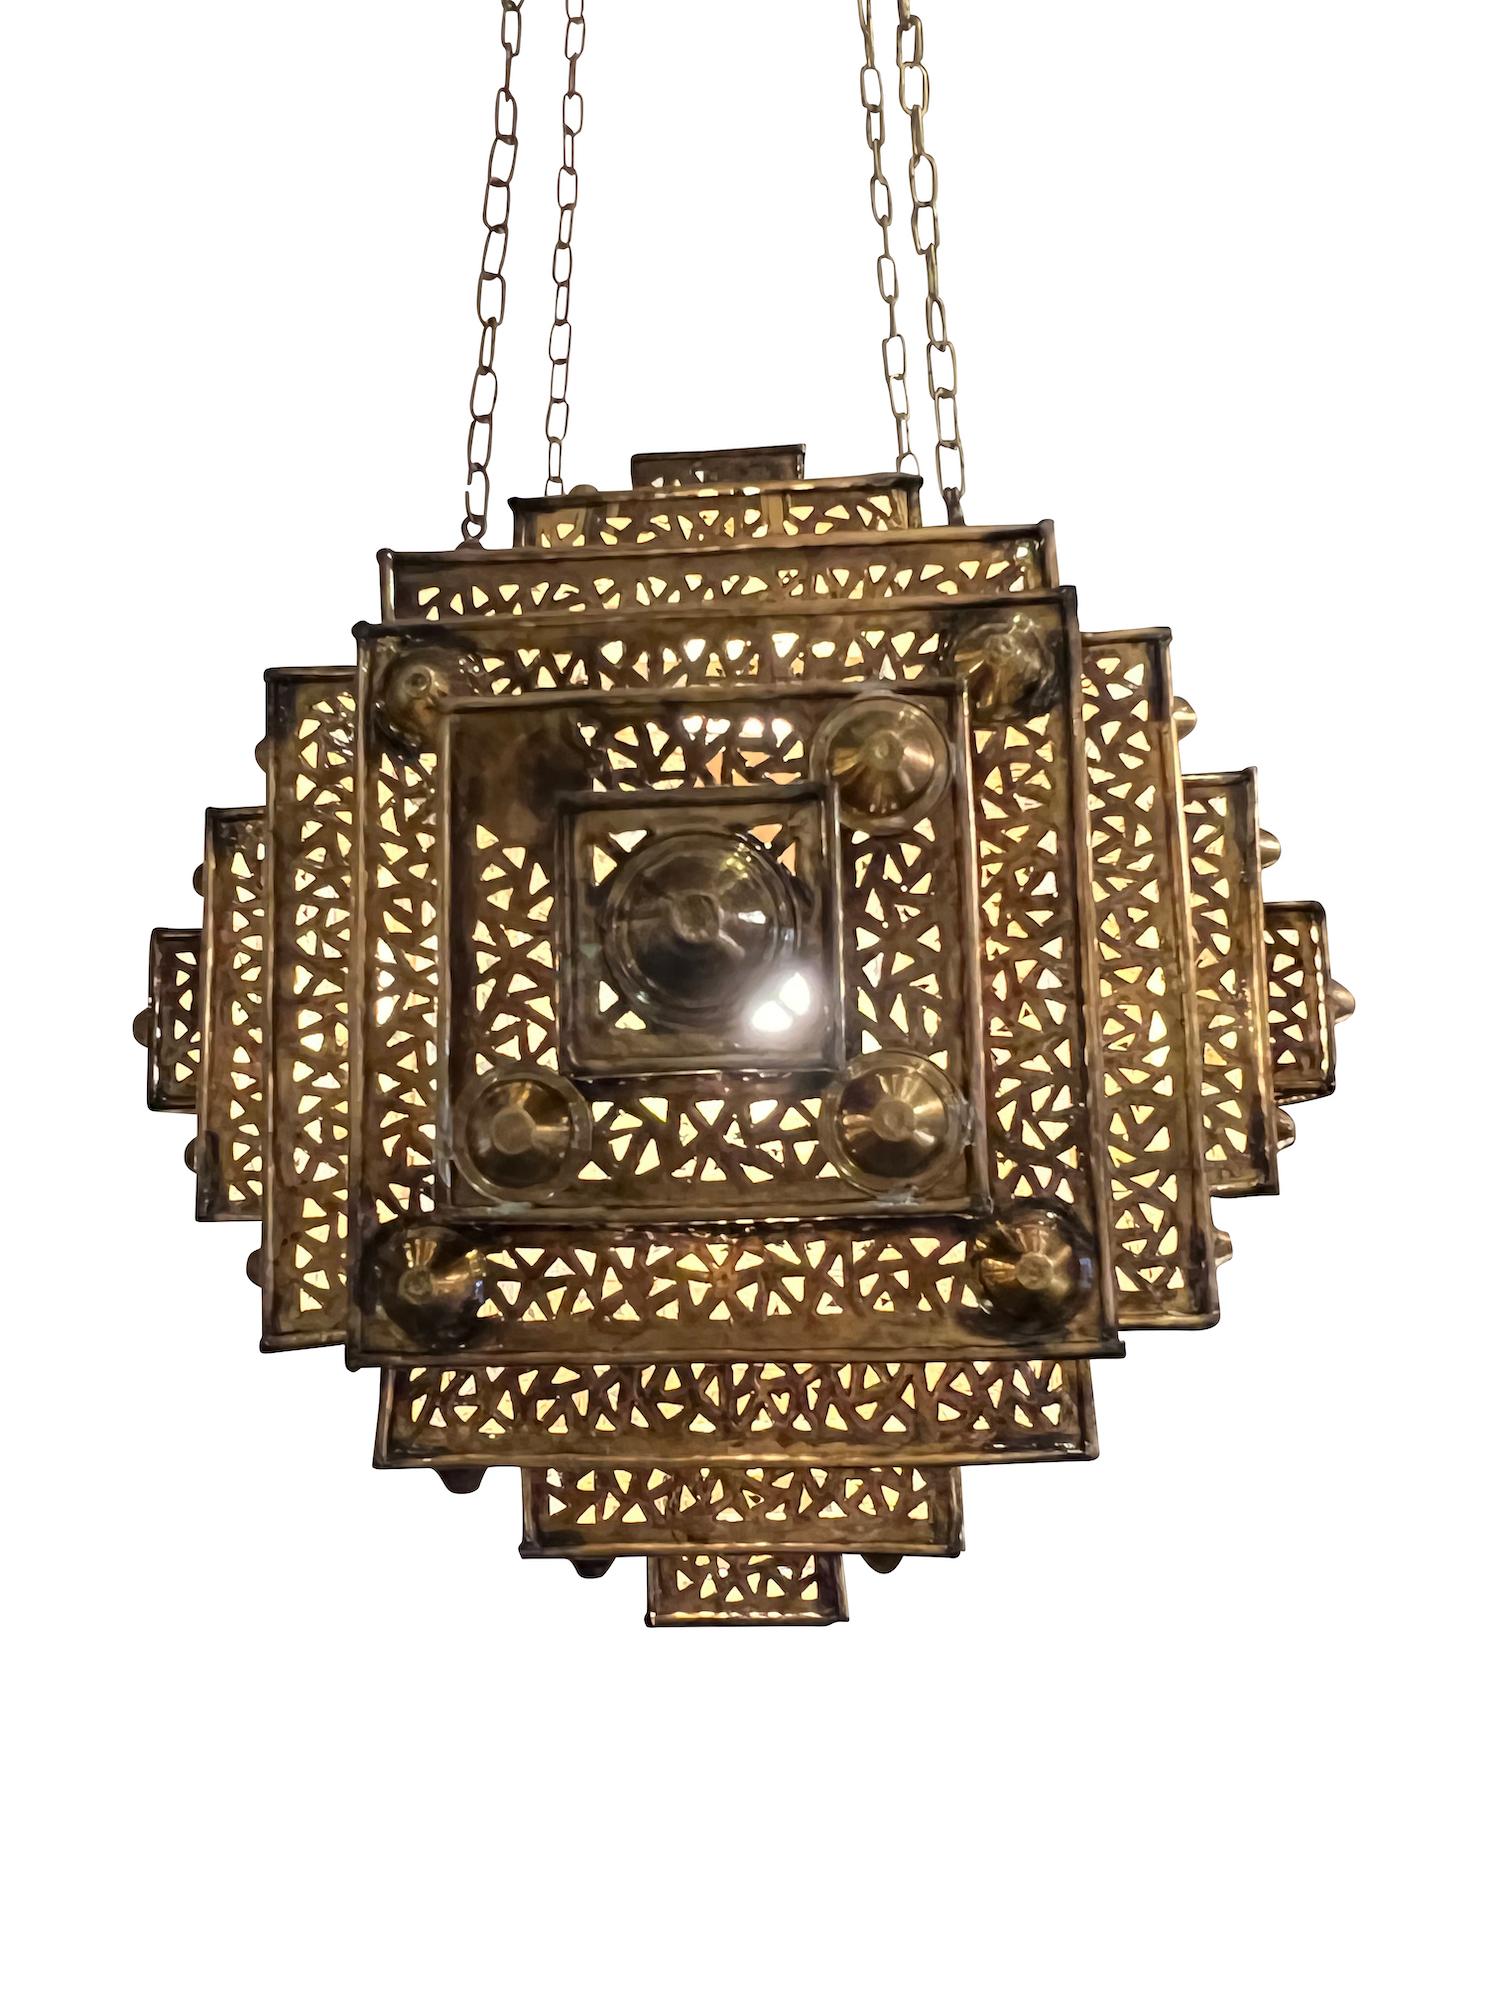 Moroccan square perforated bronze chandelier.
Multi-tiered design.
Recently rewired.
Overall height 57